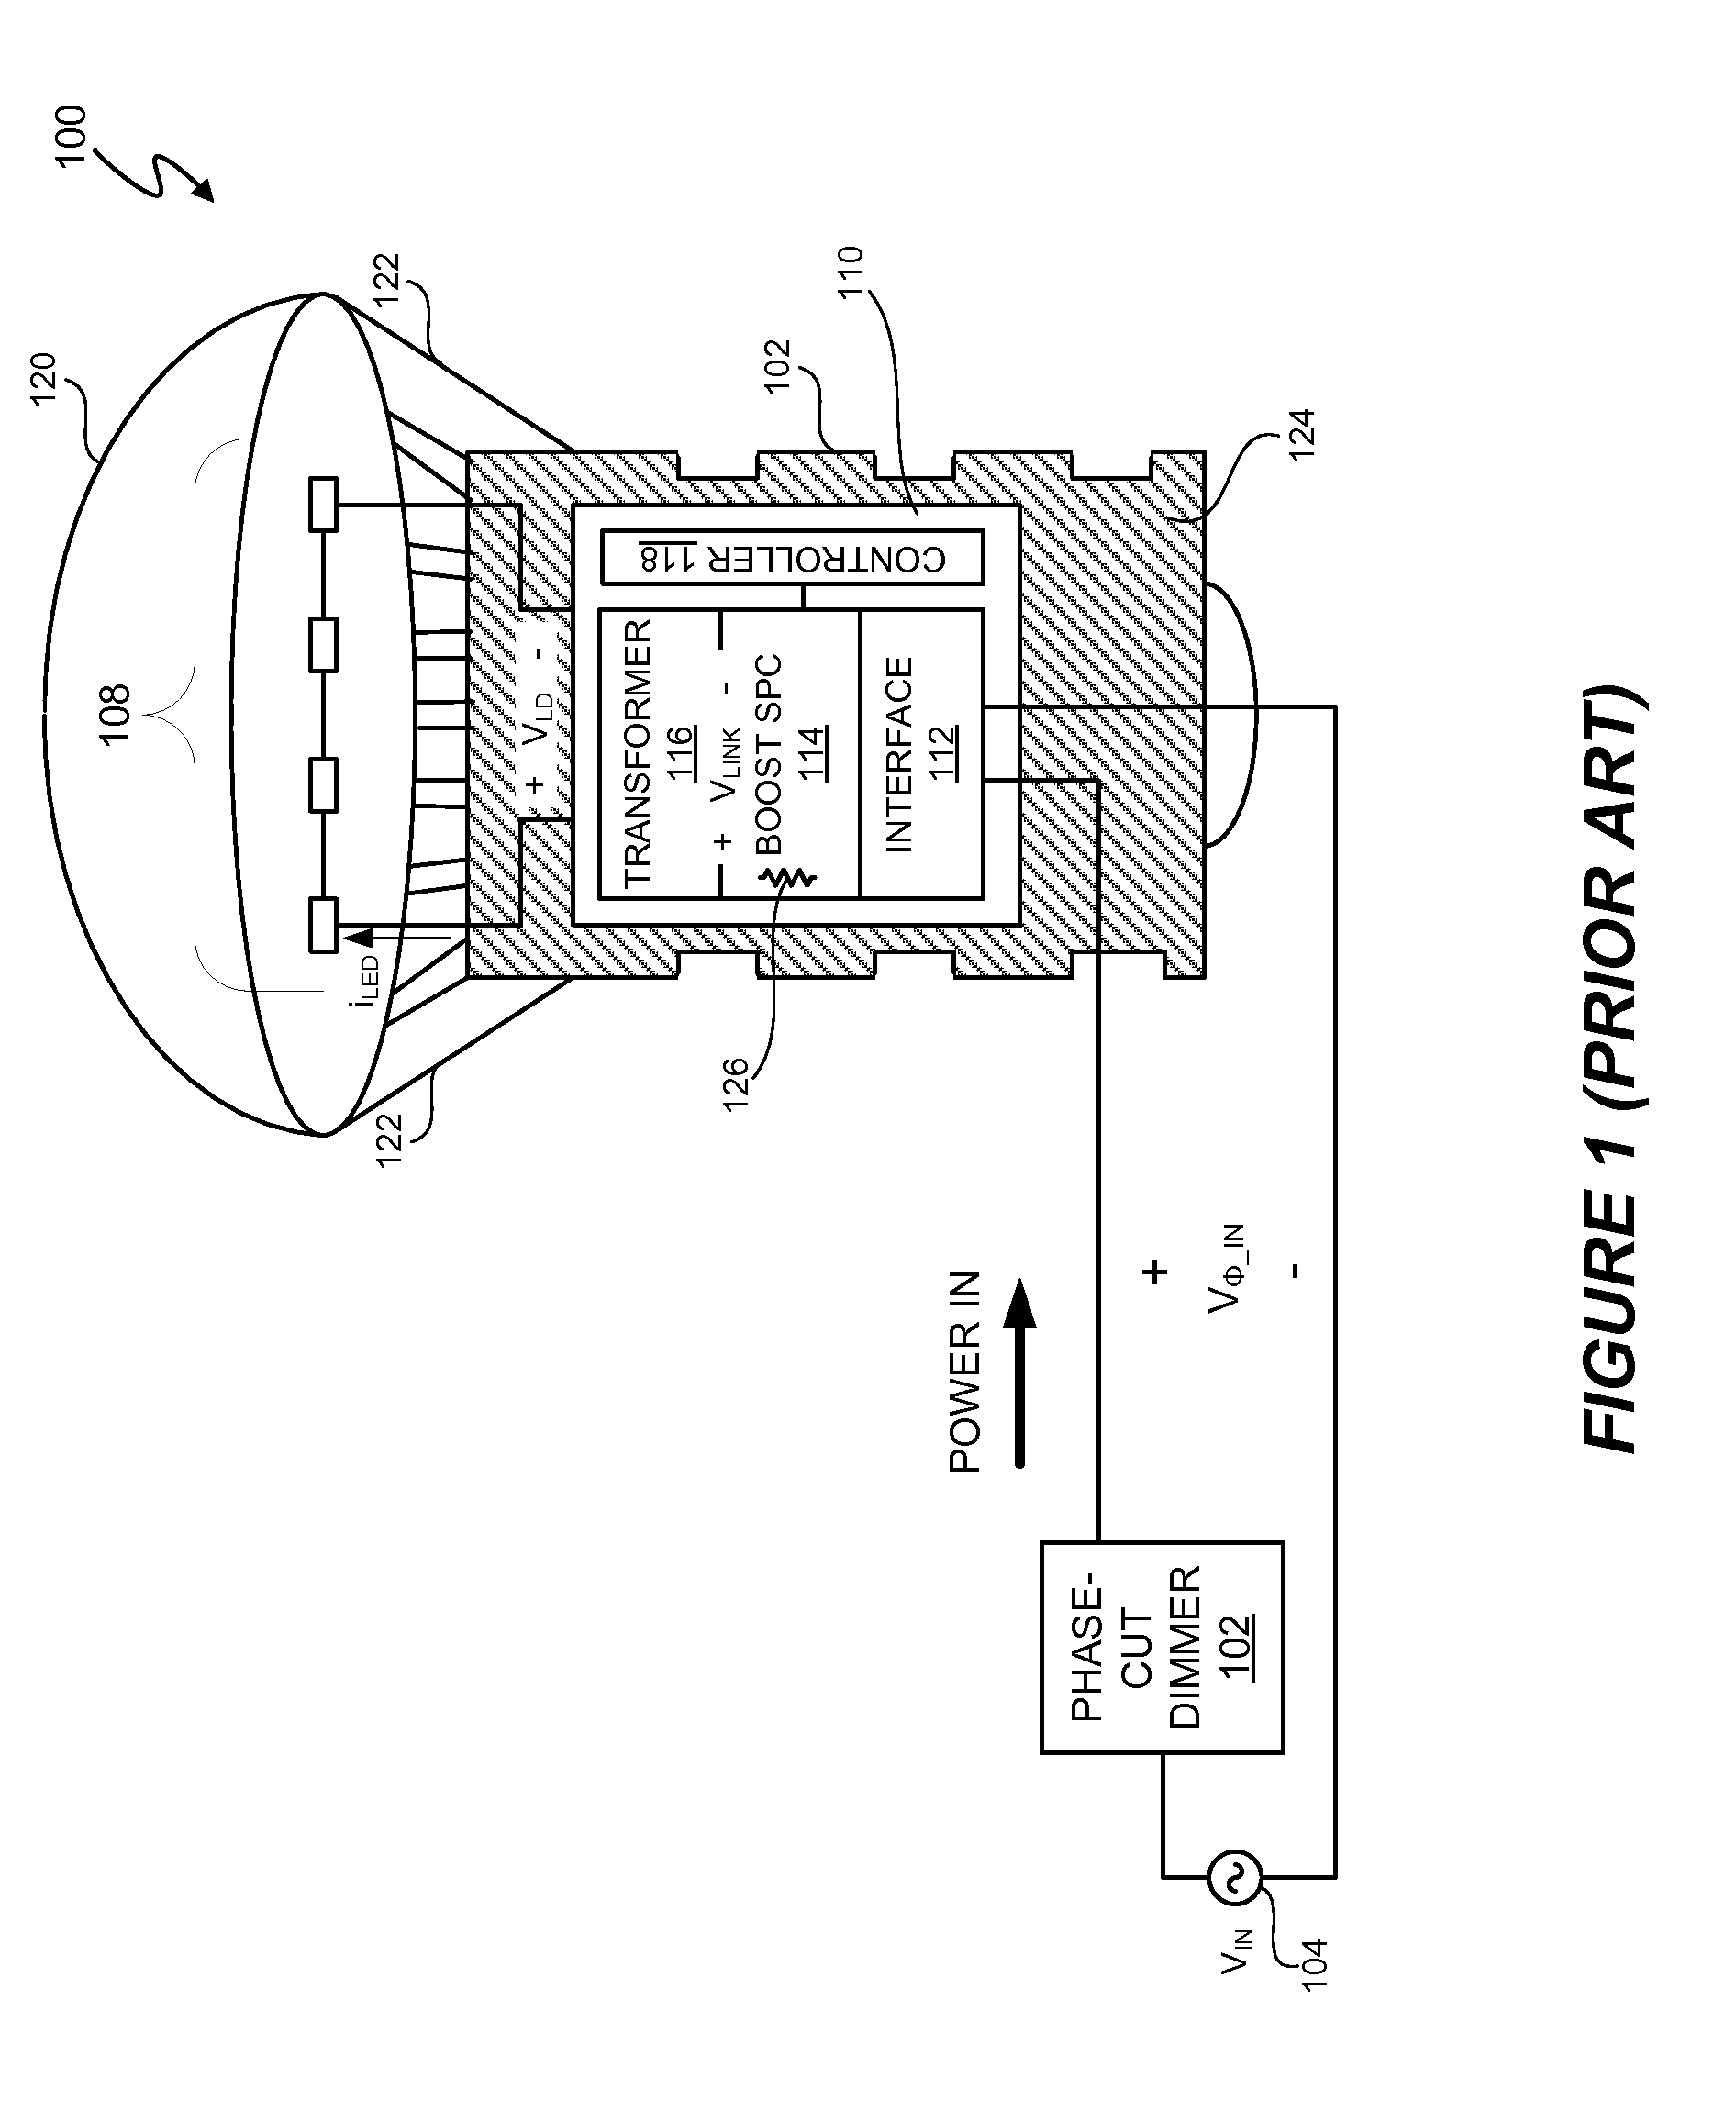 Thermal Management In A Lighting System Using Multiple, Controlled Power Dissipation Circuits